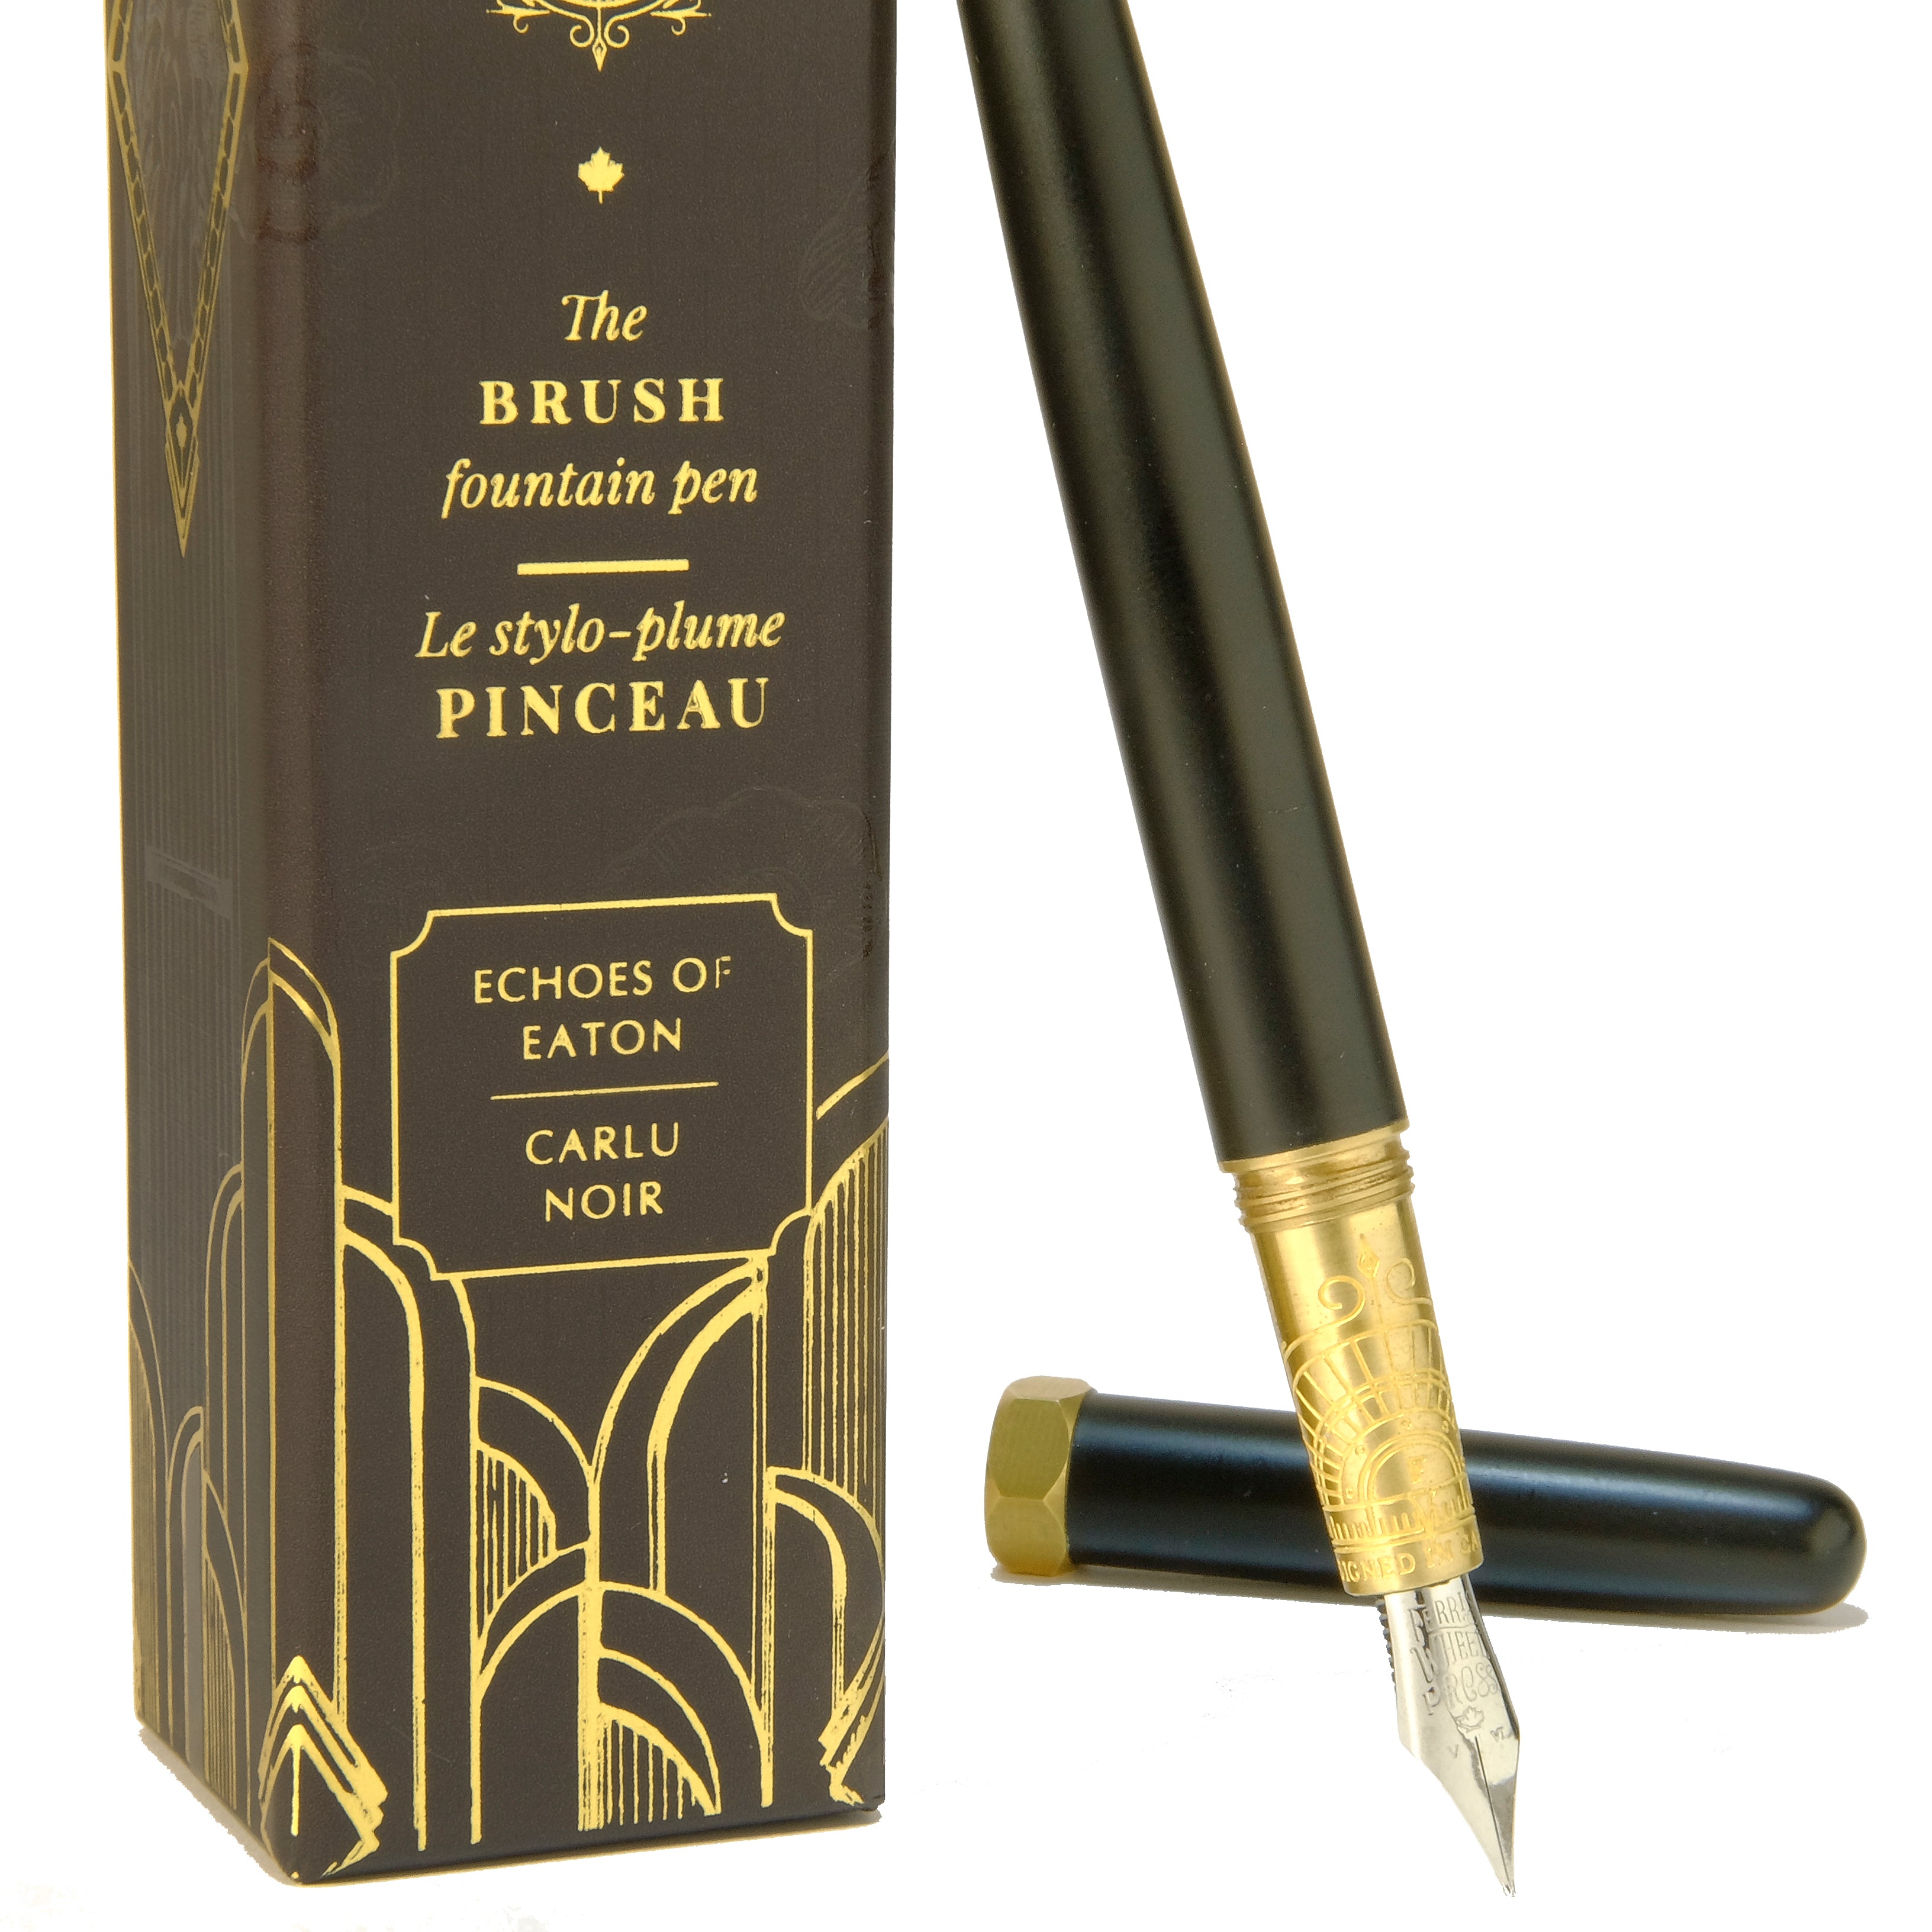 Limited Edition 2022 Echoes of Eaton Brush Fountain Pen